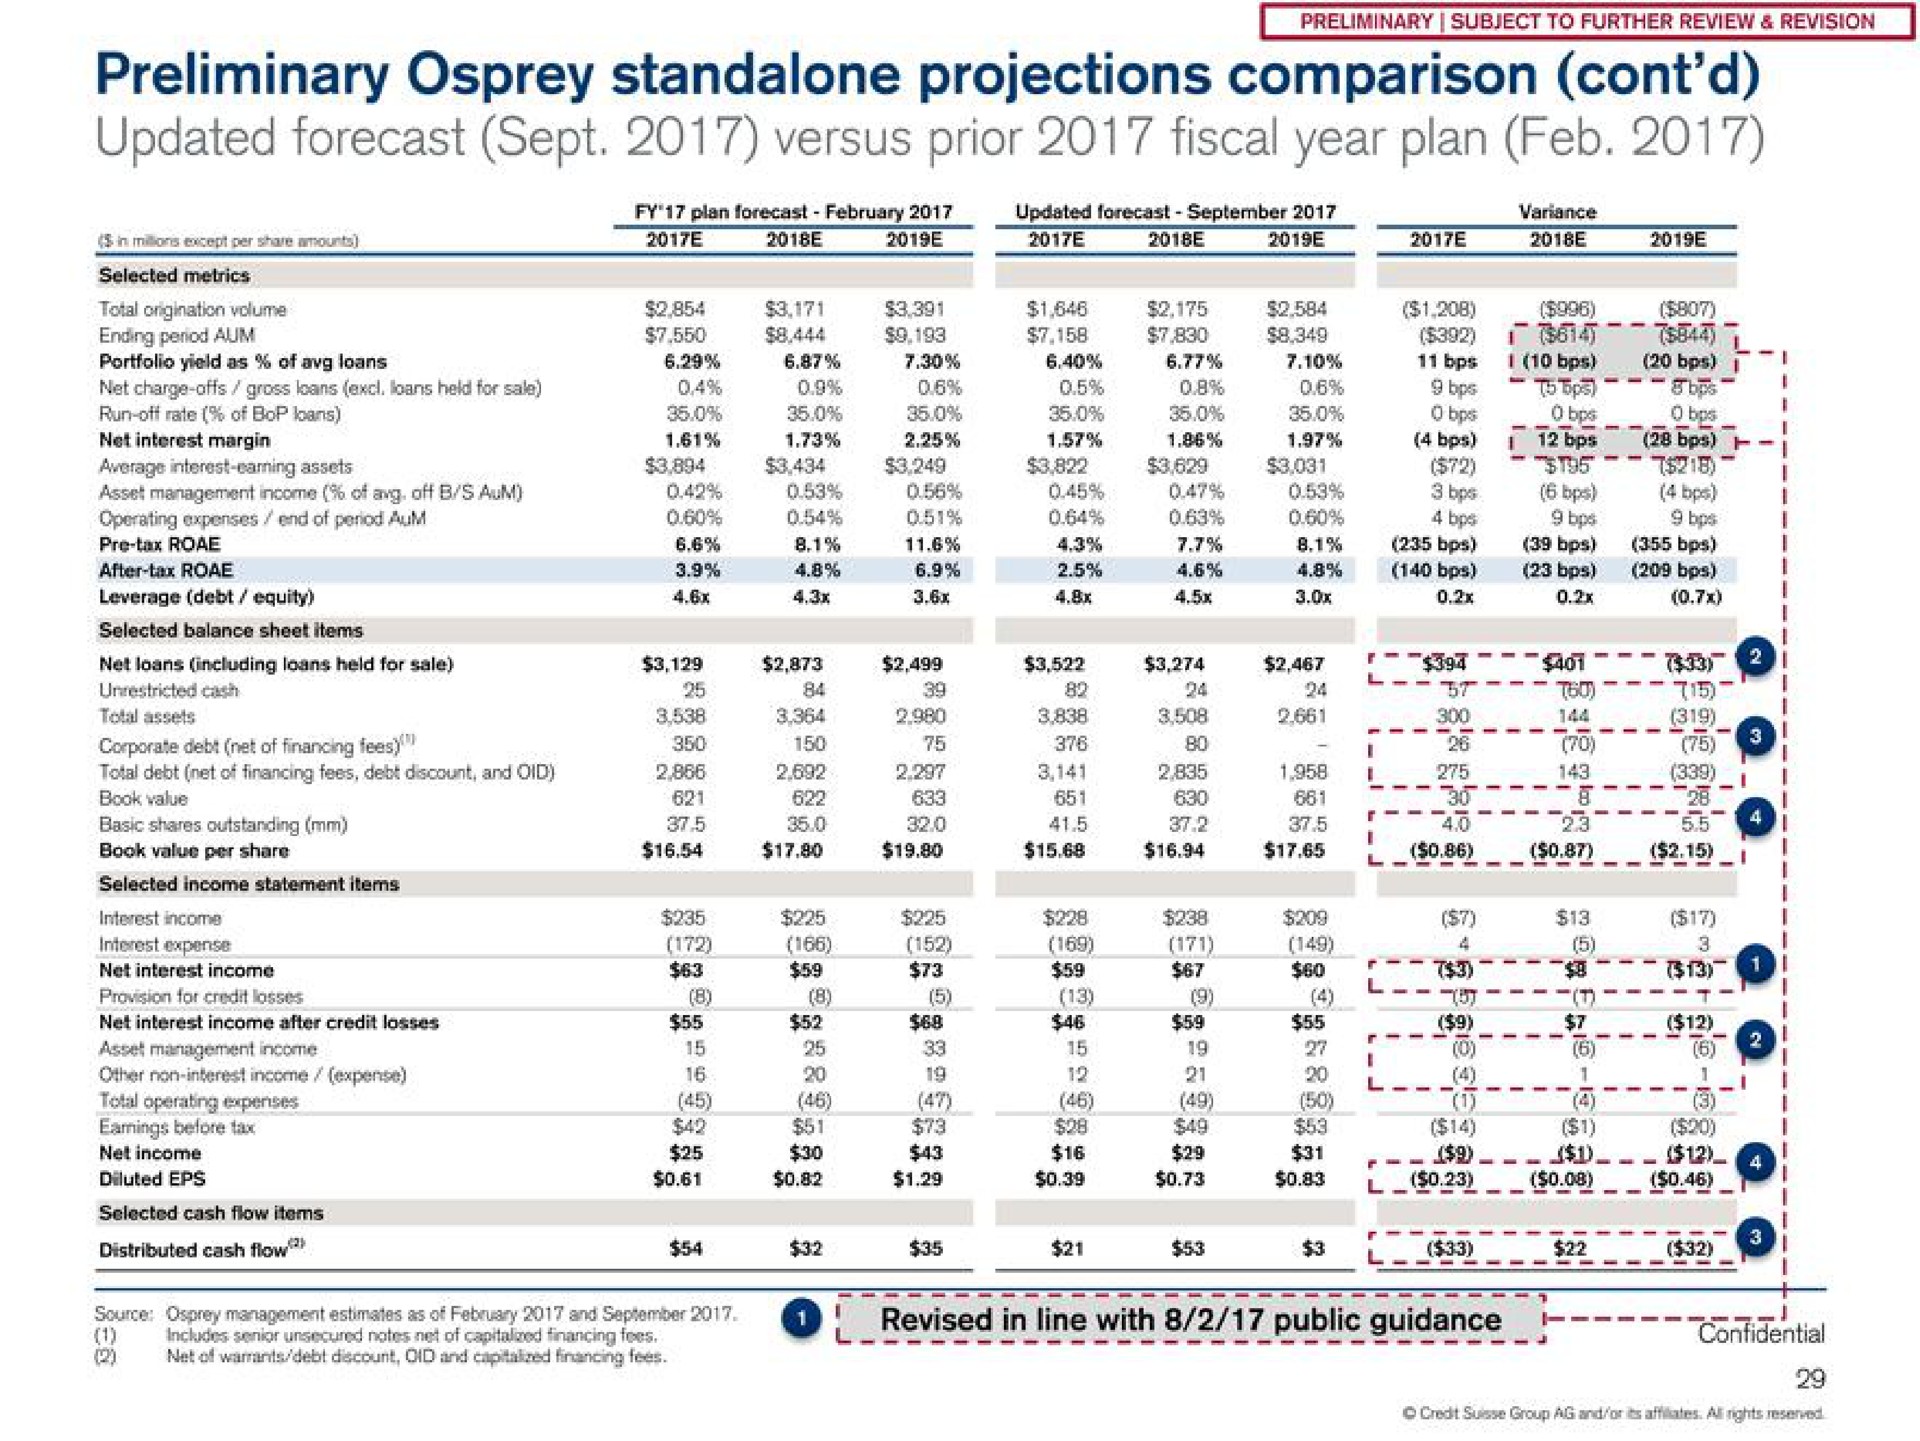 preliminary osprey projections comparison updated forecast sept versus prior fiscal year plan | Credit Suisse